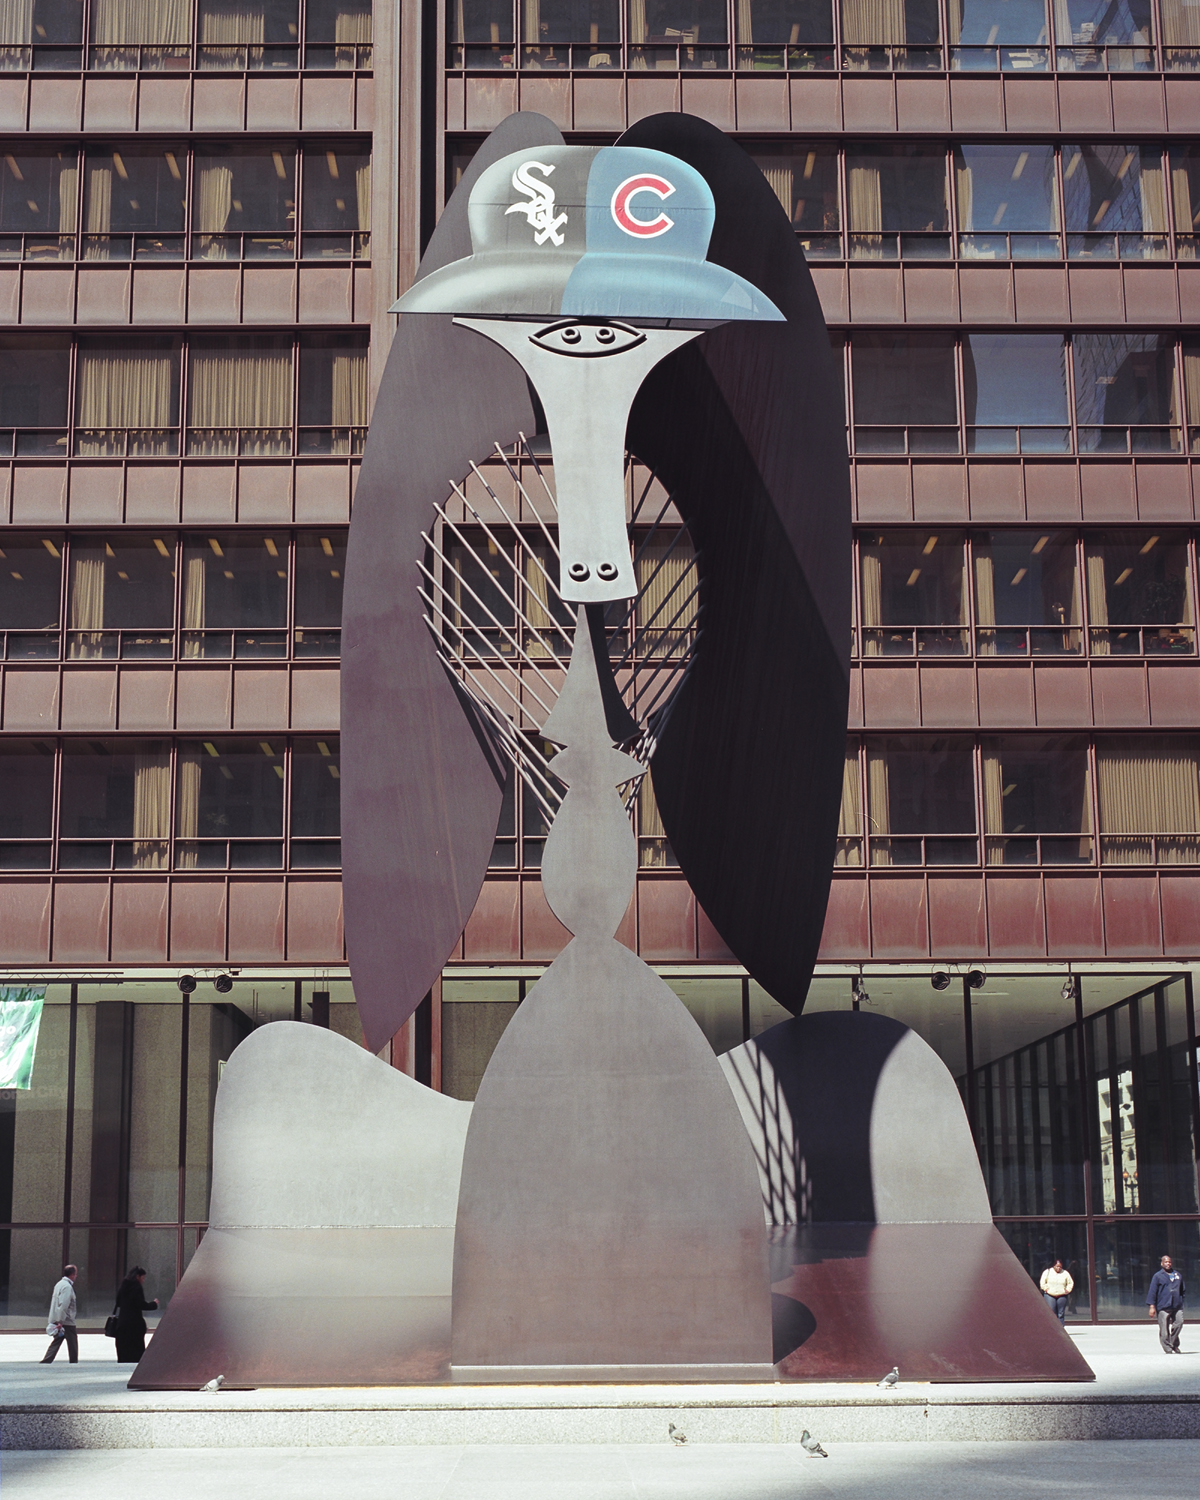 Free Wallpaper Picasso Sculpture With Chicago Cubs - Commercial Building , HD Wallpaper & Backgrounds